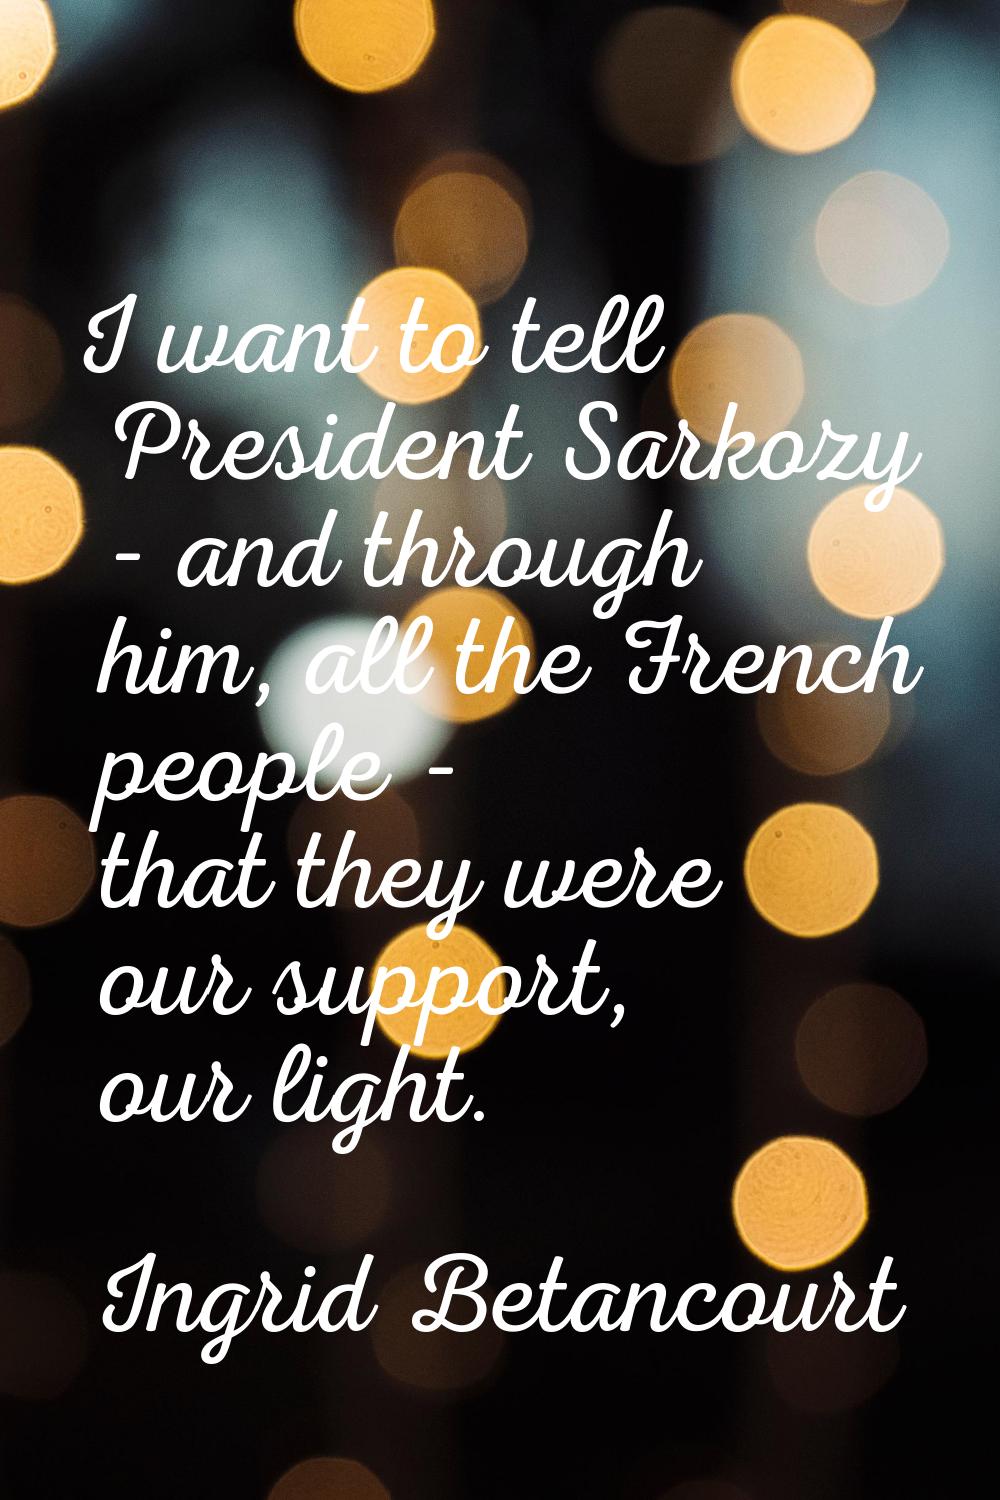 I want to tell President Sarkozy - and through him, all the French people - that they were our supp